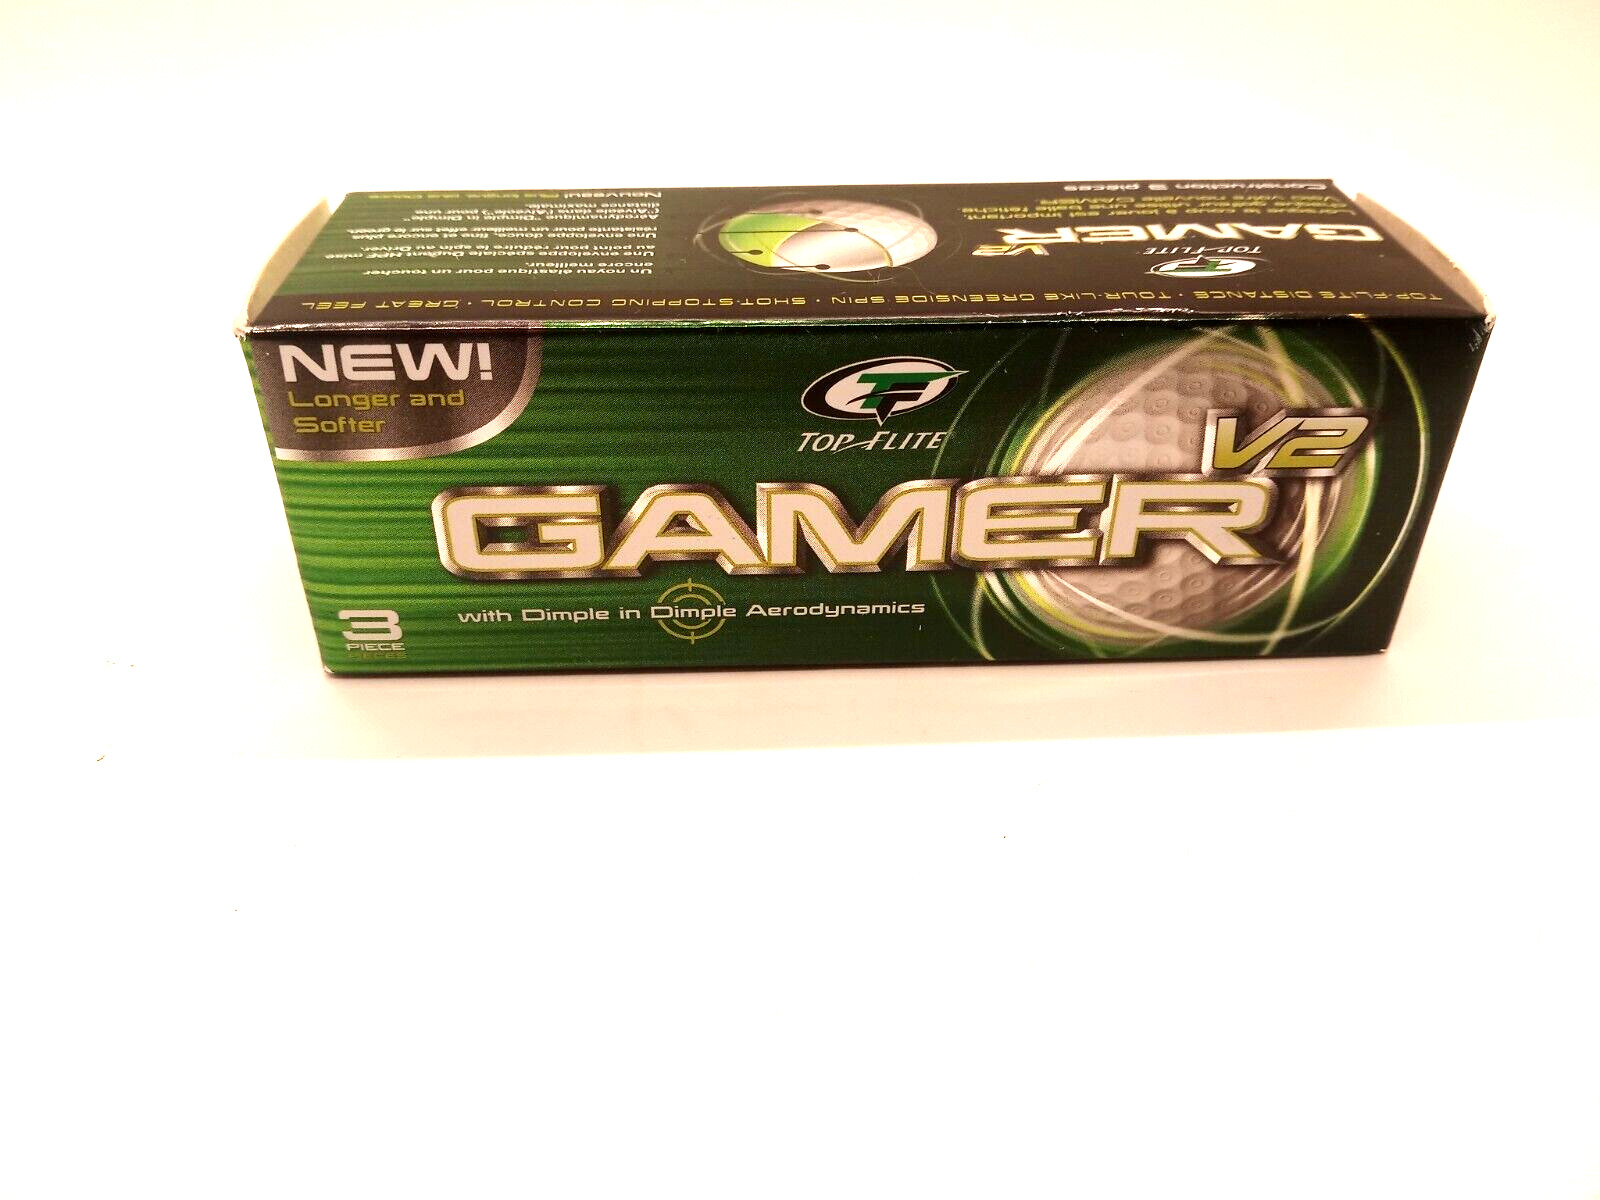 Top-Flite V2 GAMER Golf Ball 3 Count with Dimple in Dimple NEW